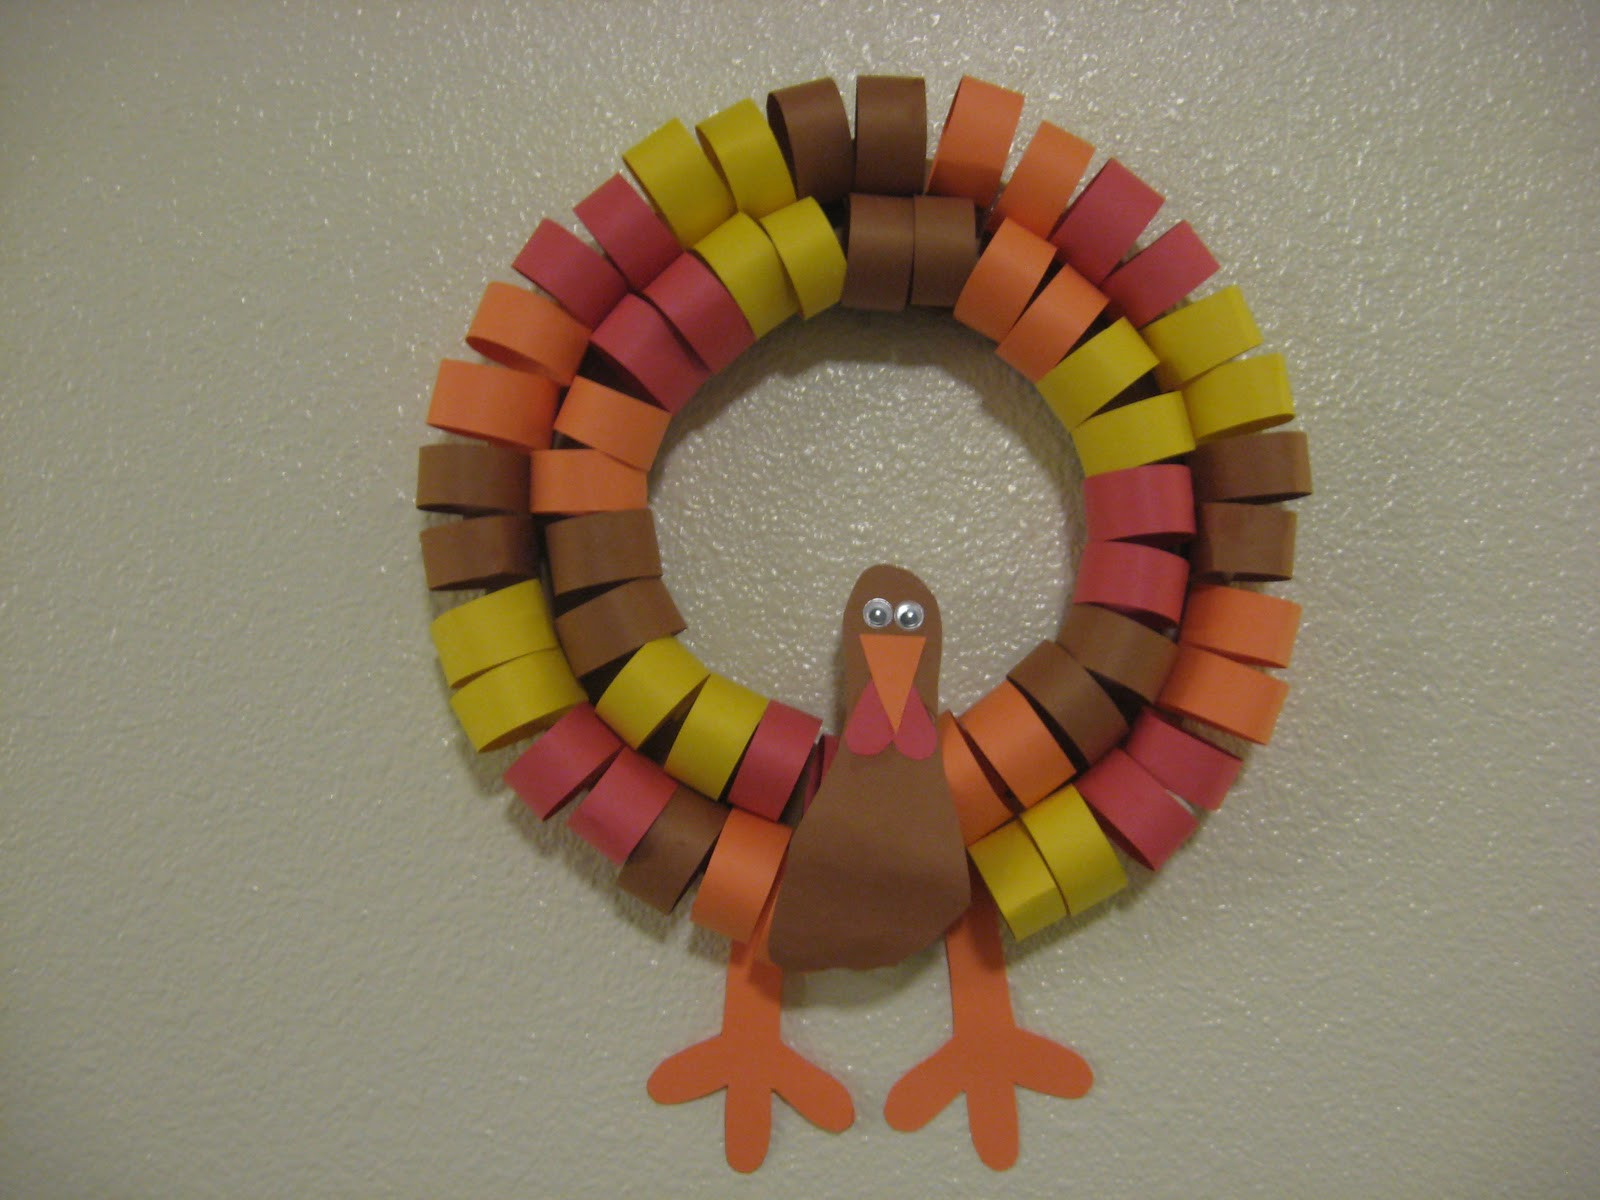 Thanksgiving Art Projects For Toddlers
 Hugs and Keepsakes 18 THANKSGIVING CRAFT IDEAS